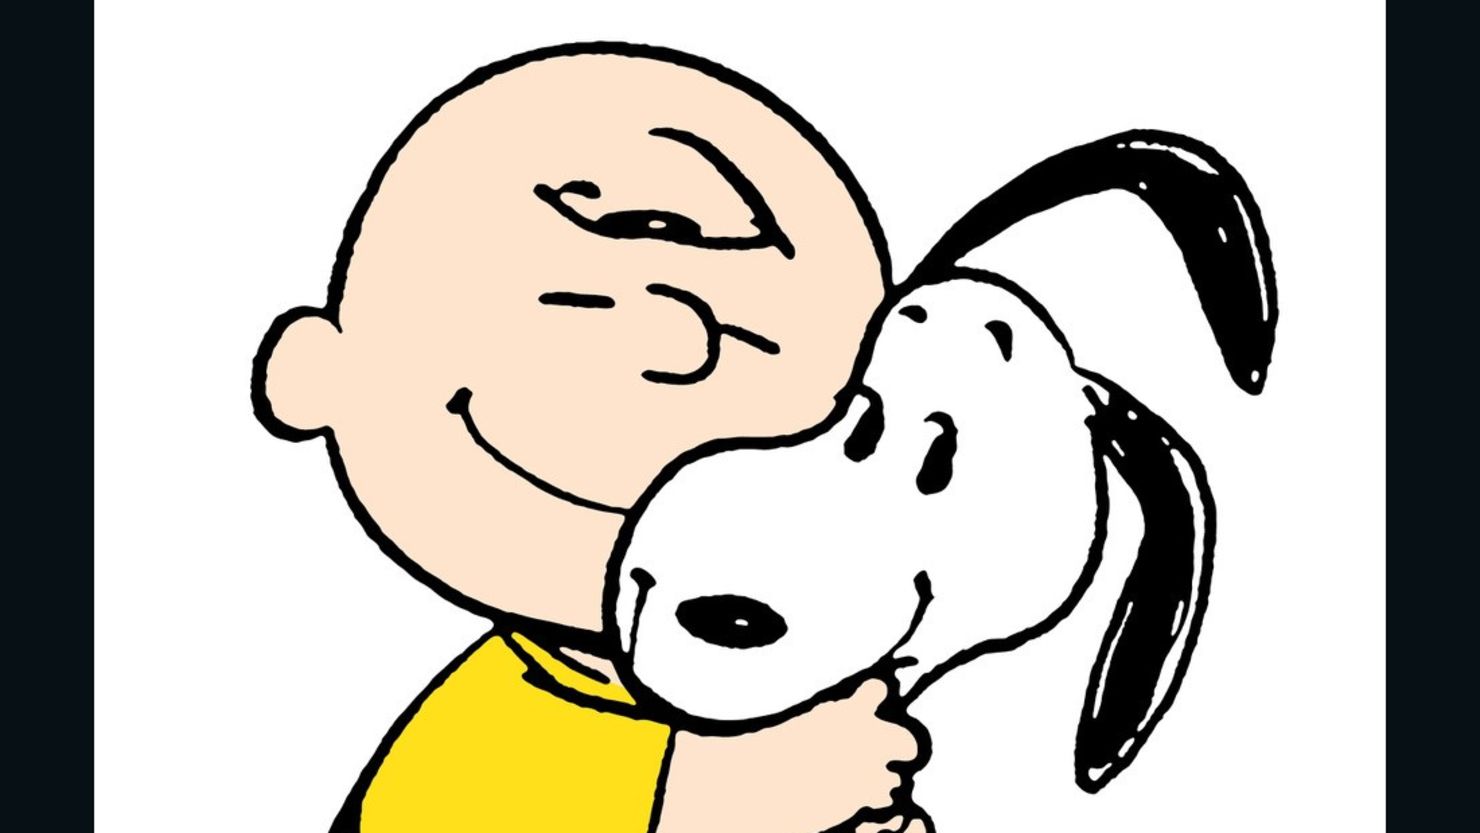 The Peanuts gang is getting new life thanks to Apple